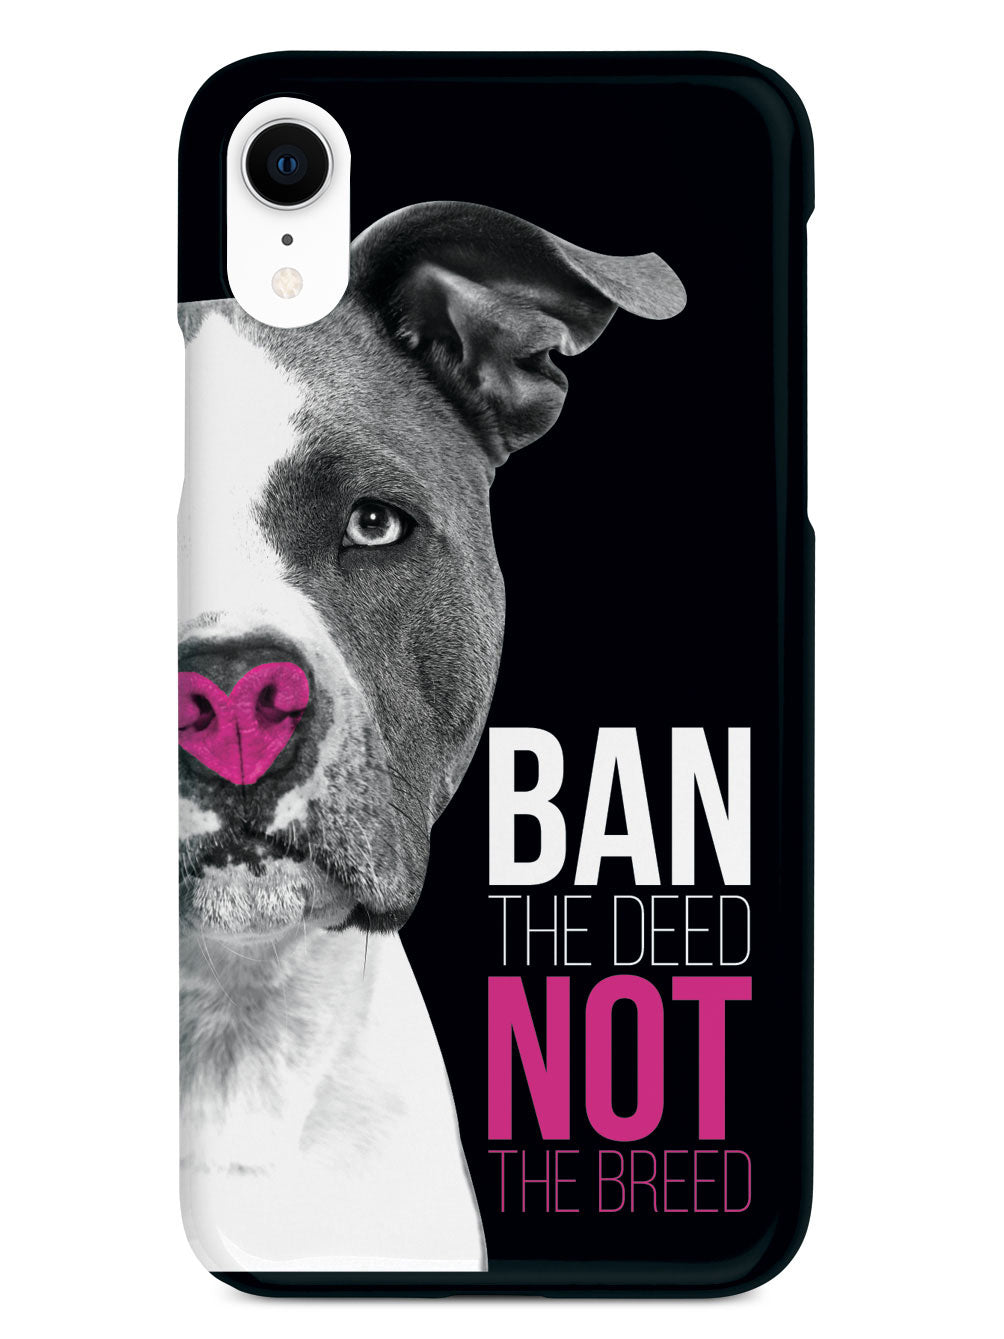 Ban The Deed, Not The Breed - Pitbull Case